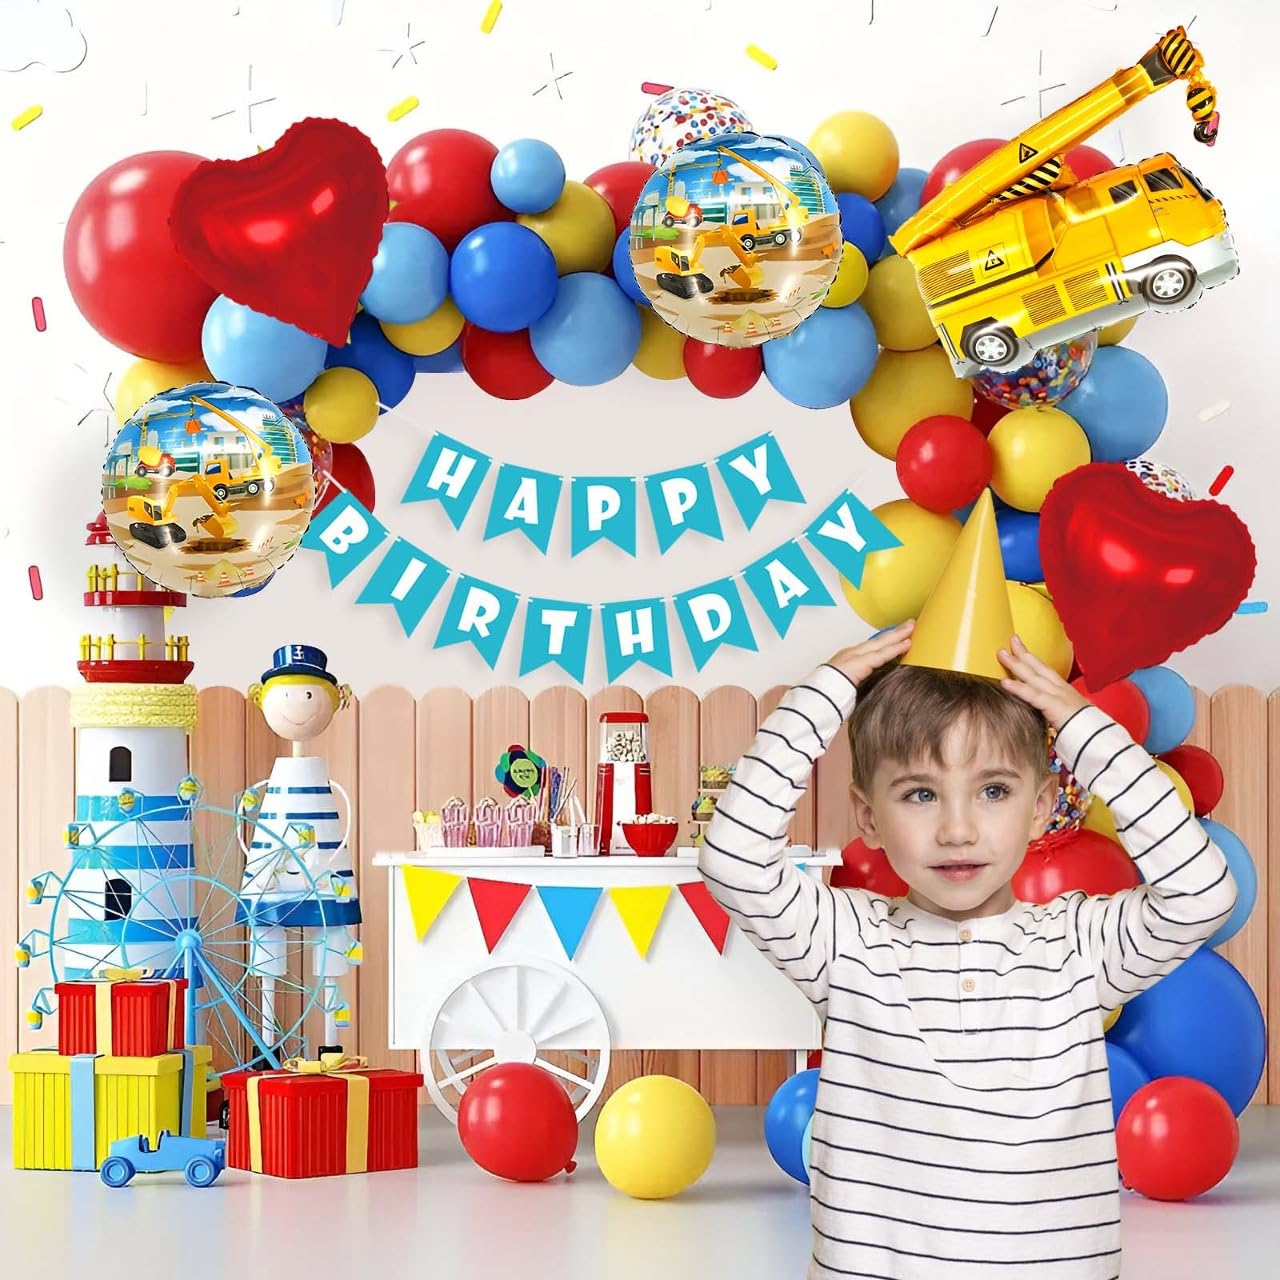 Decorate your B'day with Crane theme decor kit